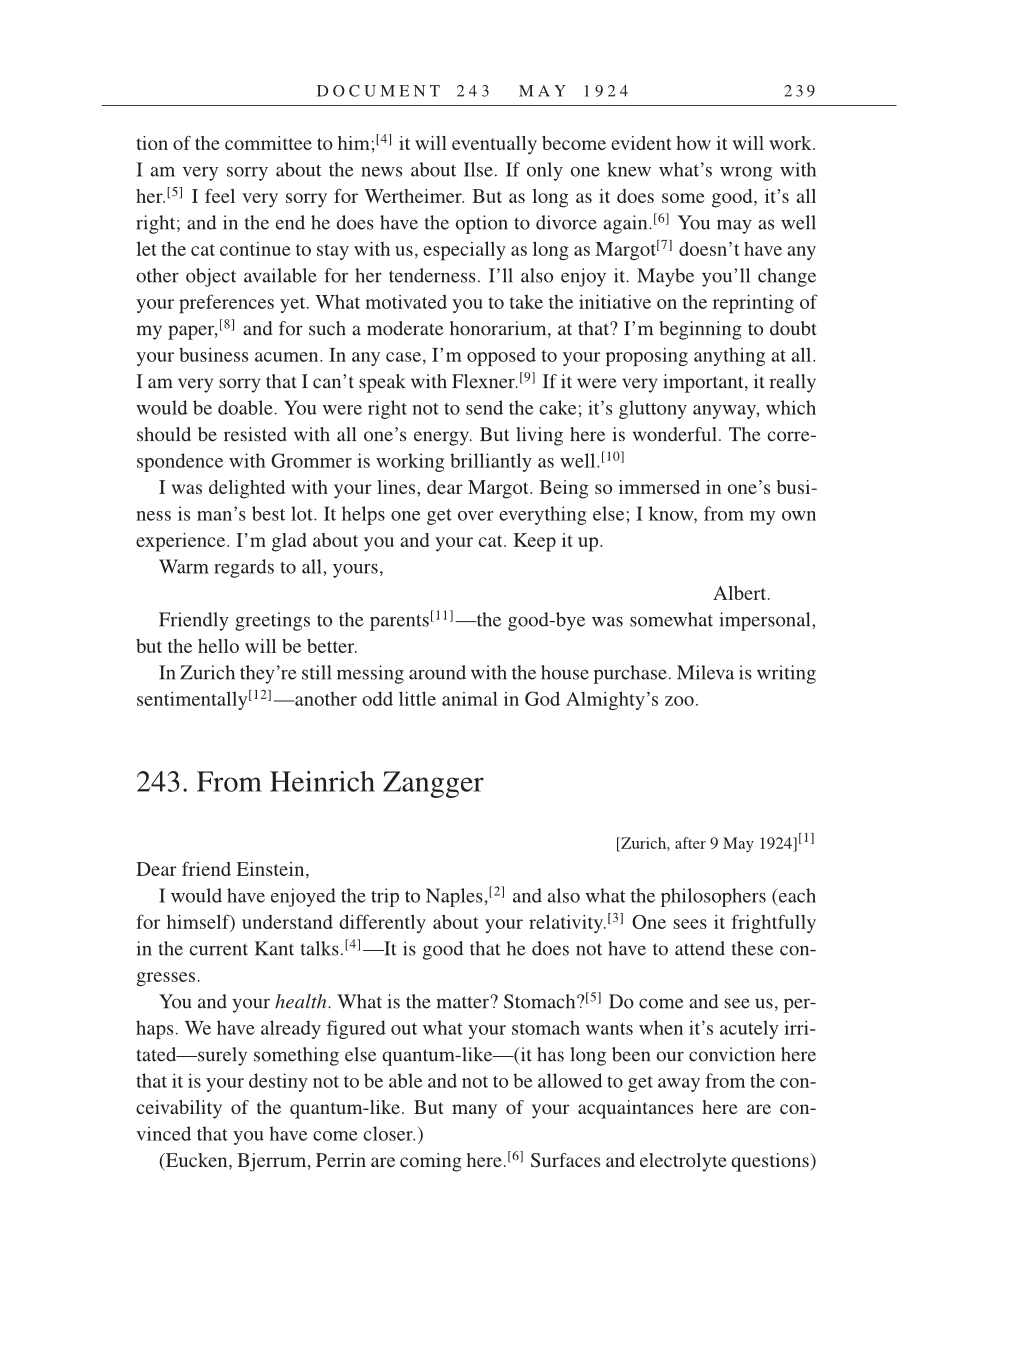 Volume 14: The Berlin Years: Writings & Correspondence, April 1923-May 1925 (English Translation Supplement) page 239